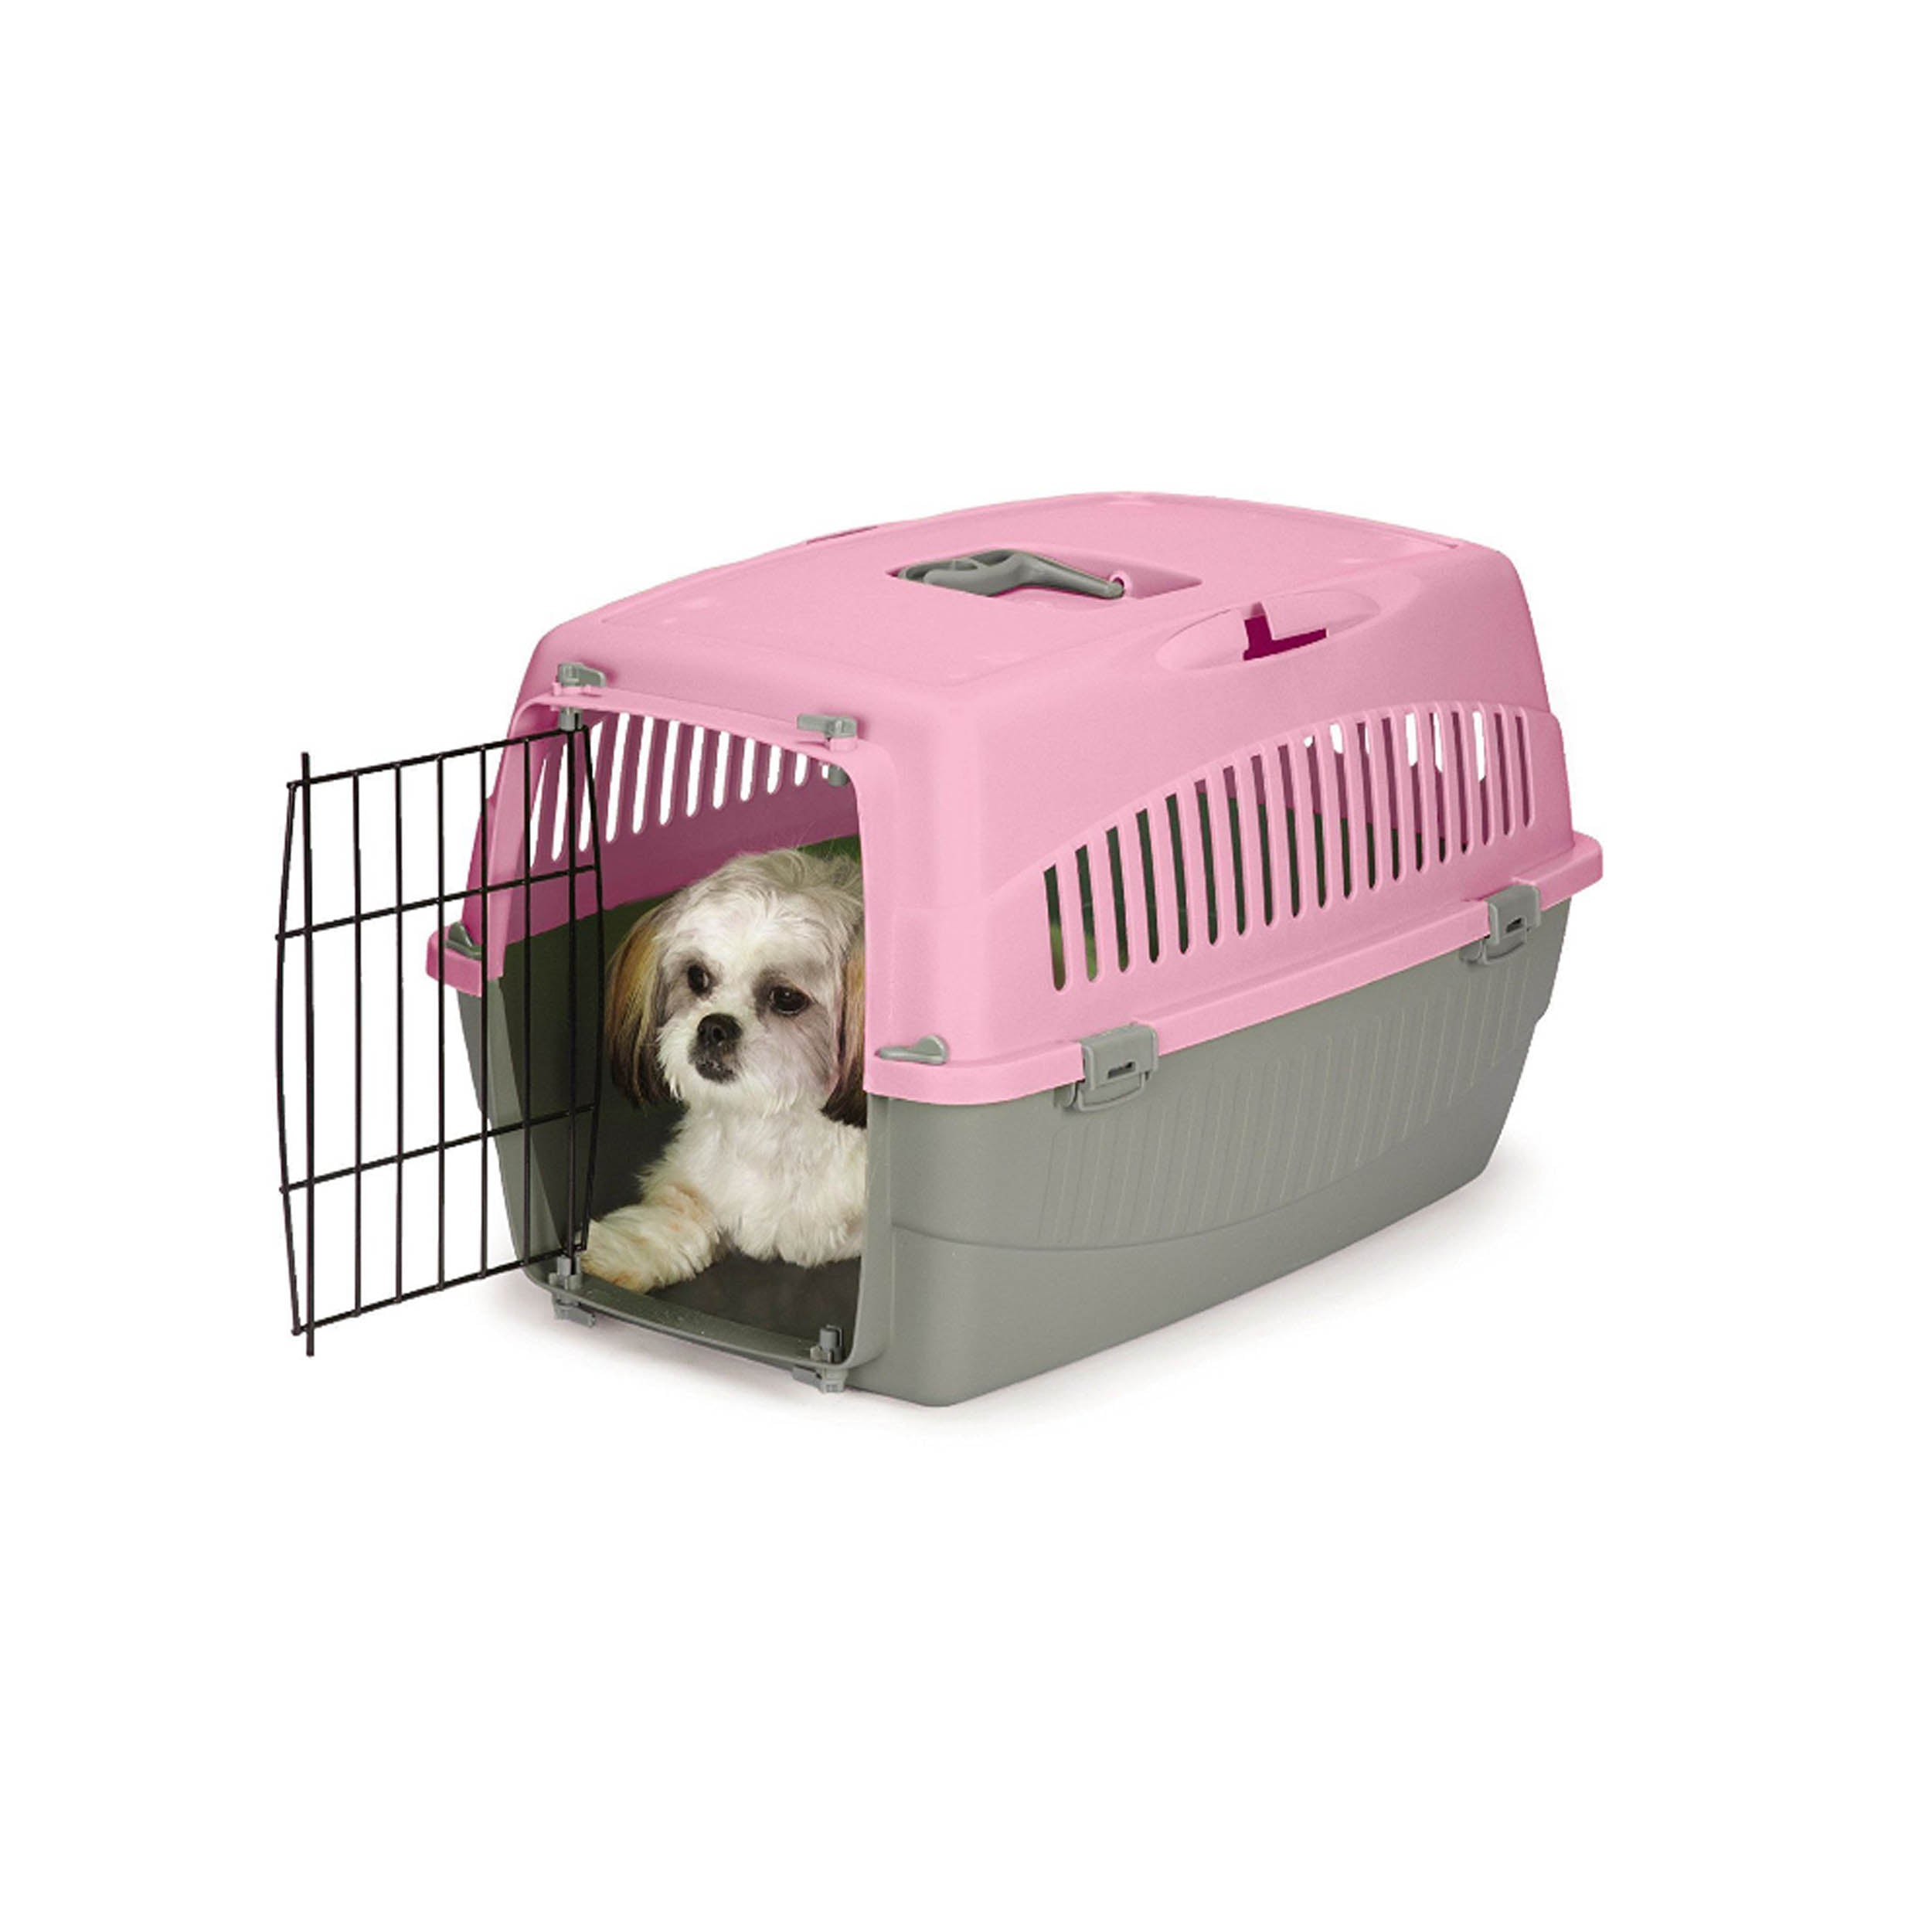 Cruising Companion Carry Me Pet Crate variety Of colors Pink, Orange, Green, Blue with grey base. Crate is extra comfortable and perfectly beathable. Intended use for travel, vet visits, or car rides. Sizes vary in only small and medium. Image model Shitzu inside Medium  pink crate